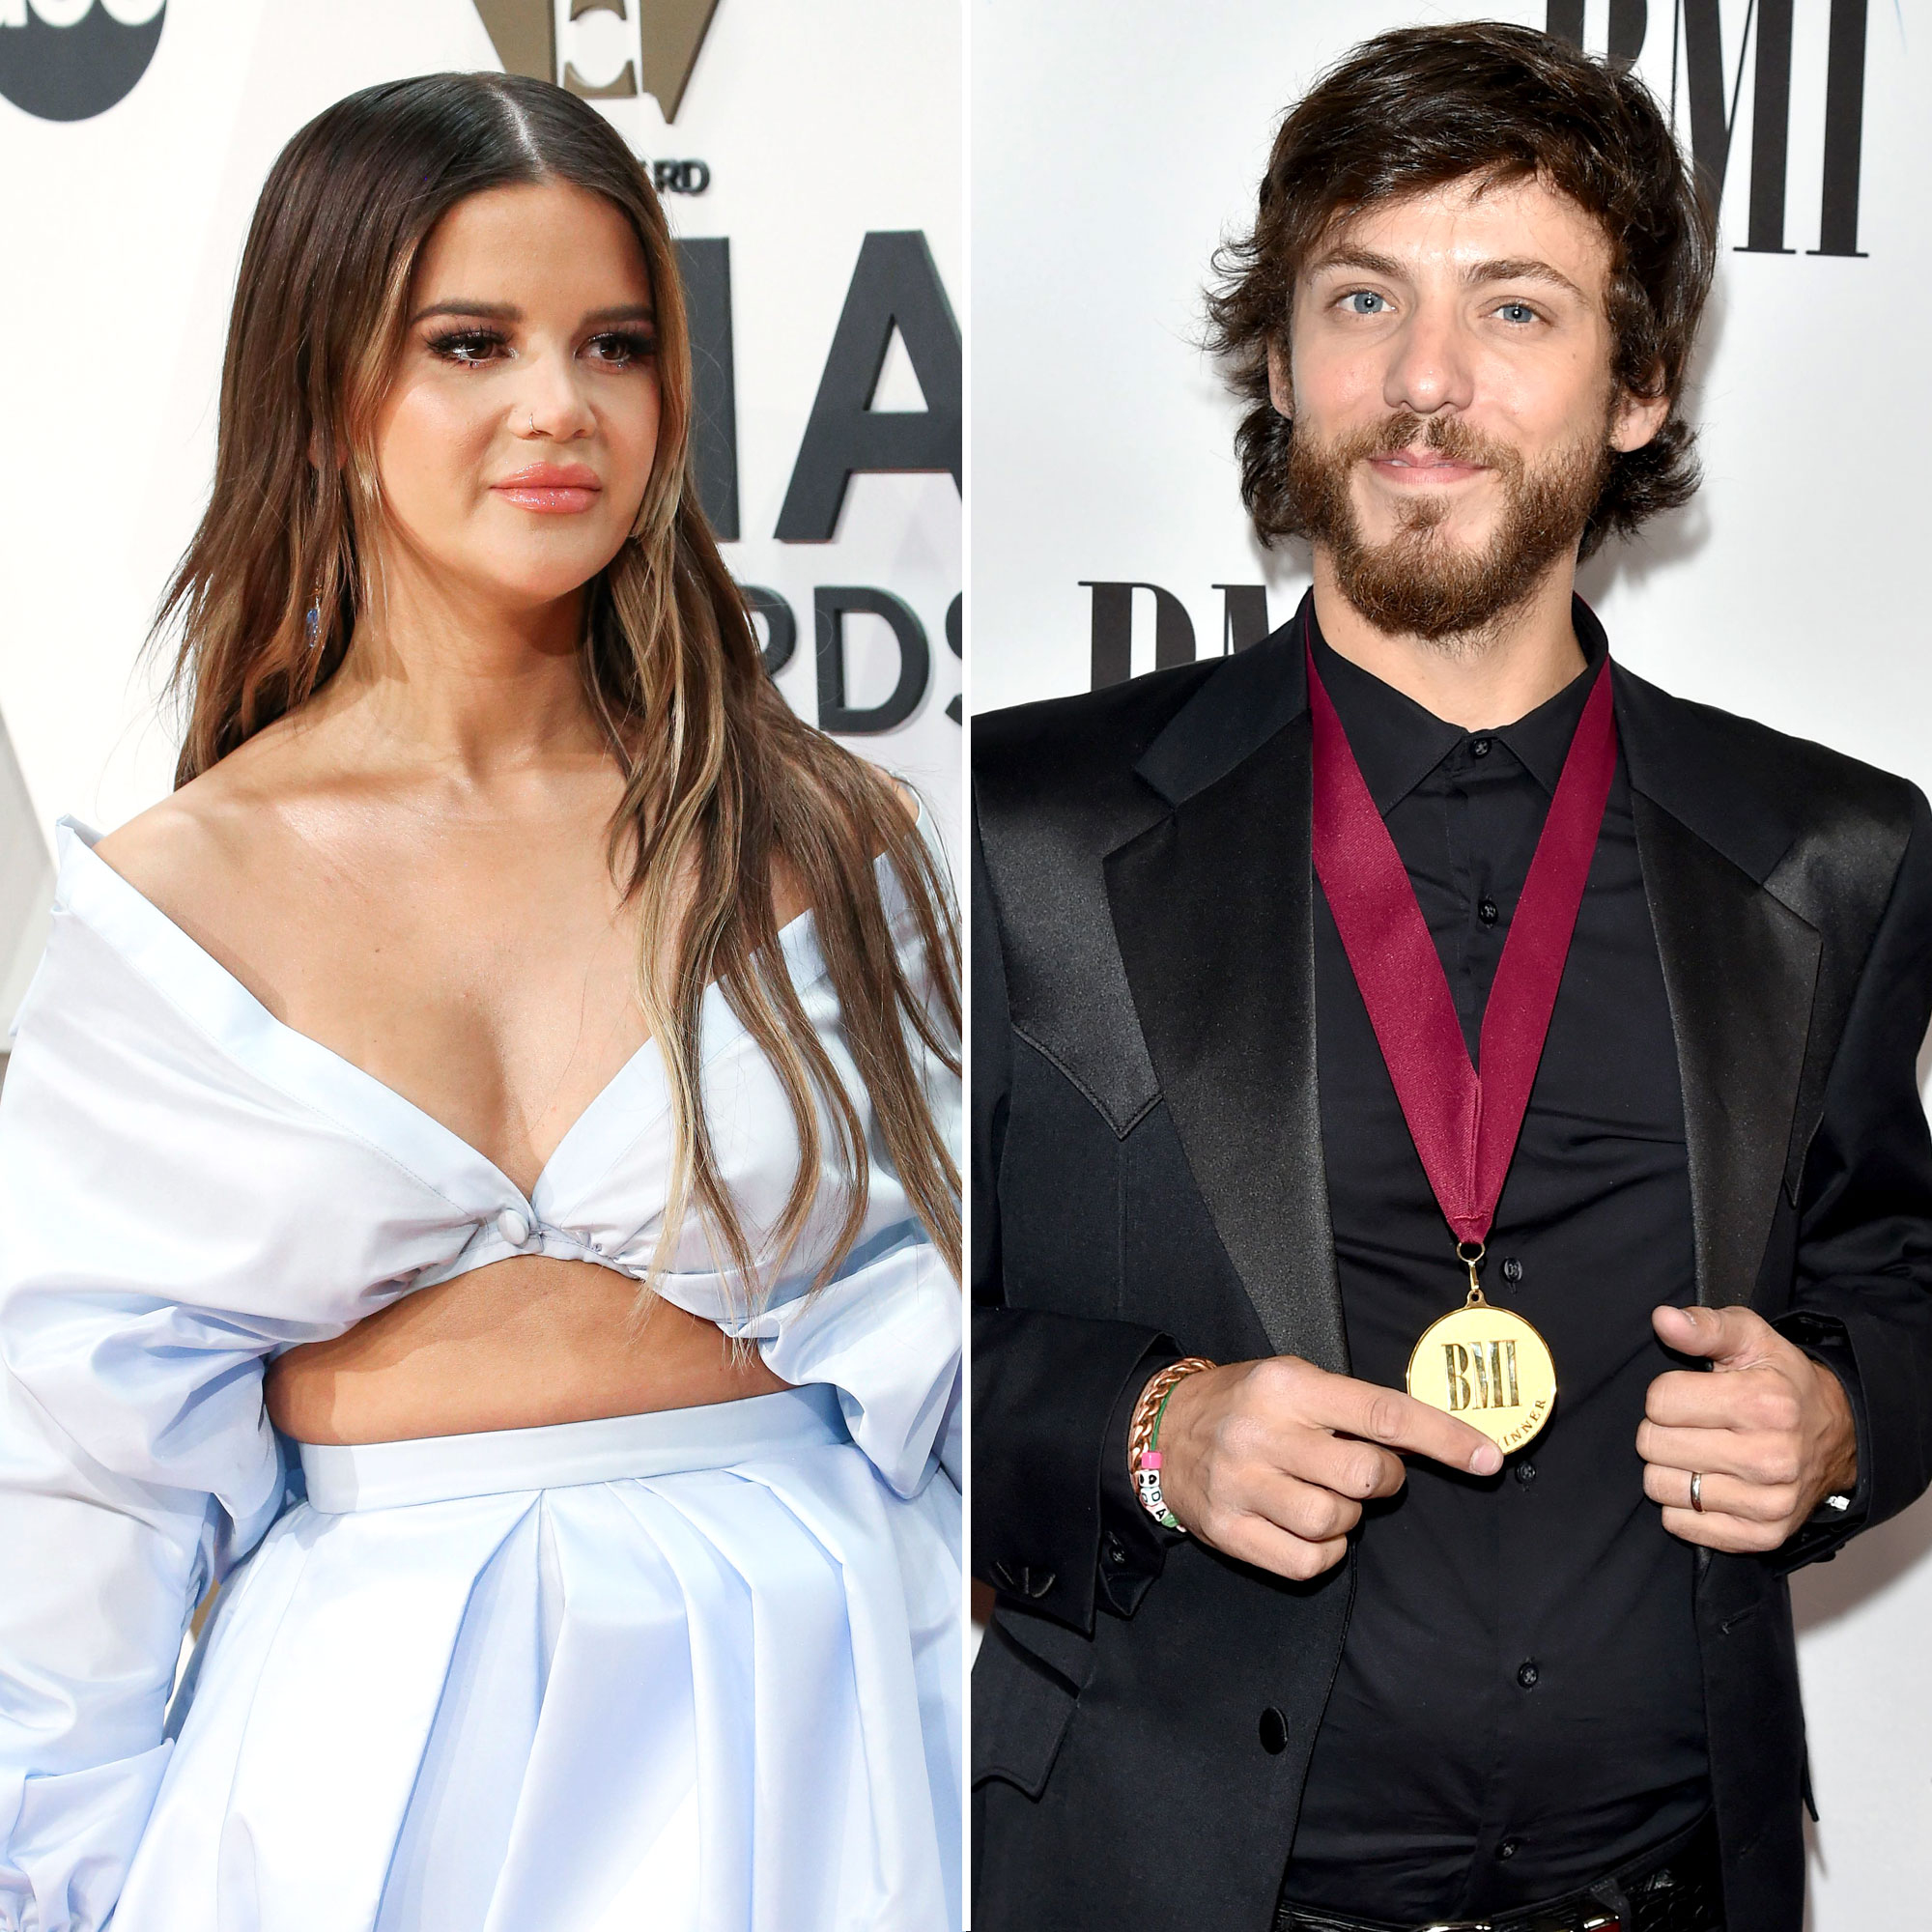 Maren Morris Learns Chris Janson Blocked Her After Packed Concert